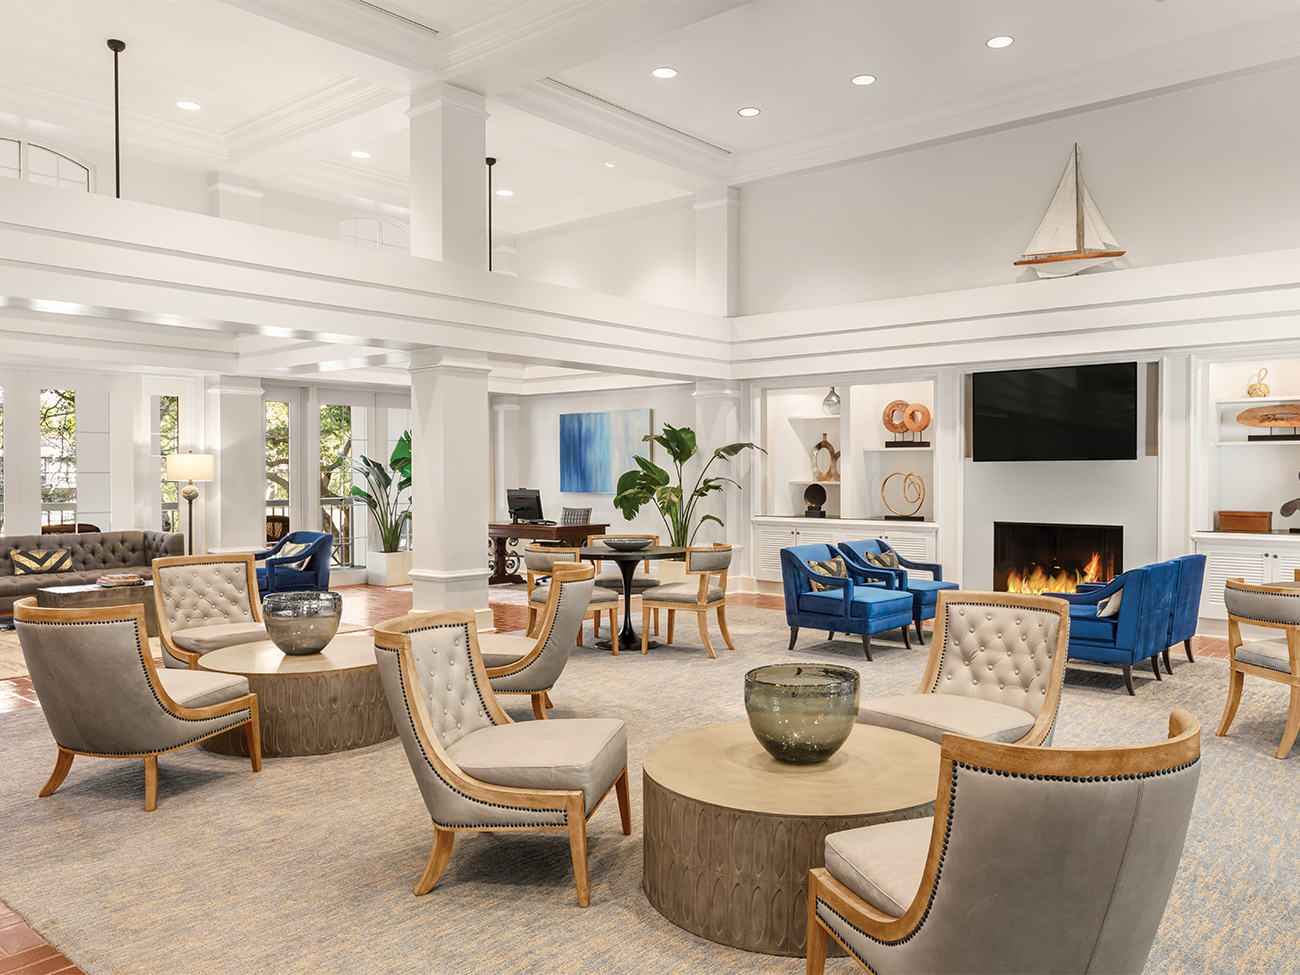 Marriott's Harbour Club Lobby. Marriott's Harbour Club is located in Hilton Head Island, South Carolina United States.